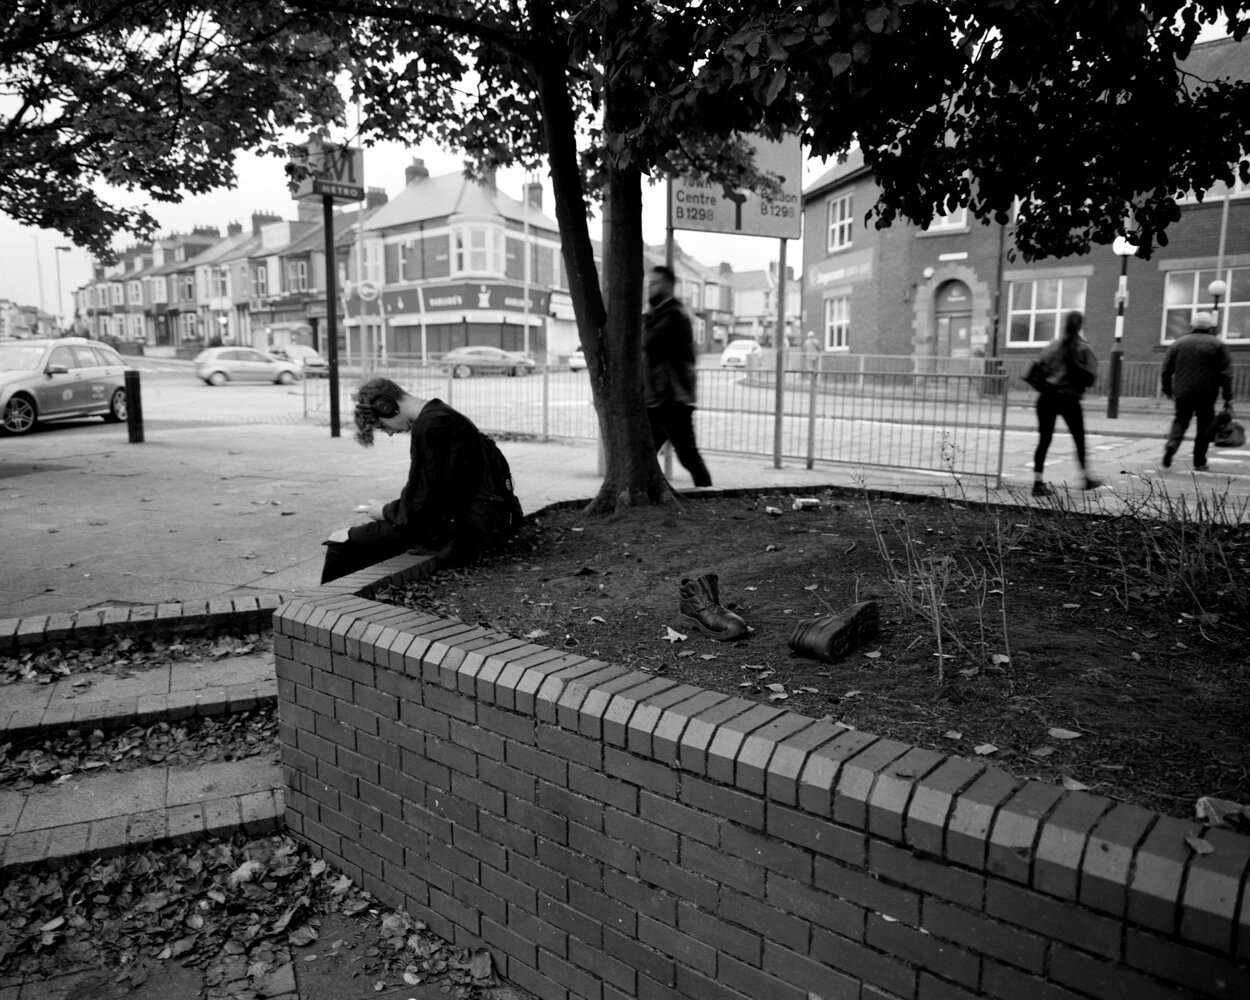 A Boy Looking At His Phone - South Shields.jpg